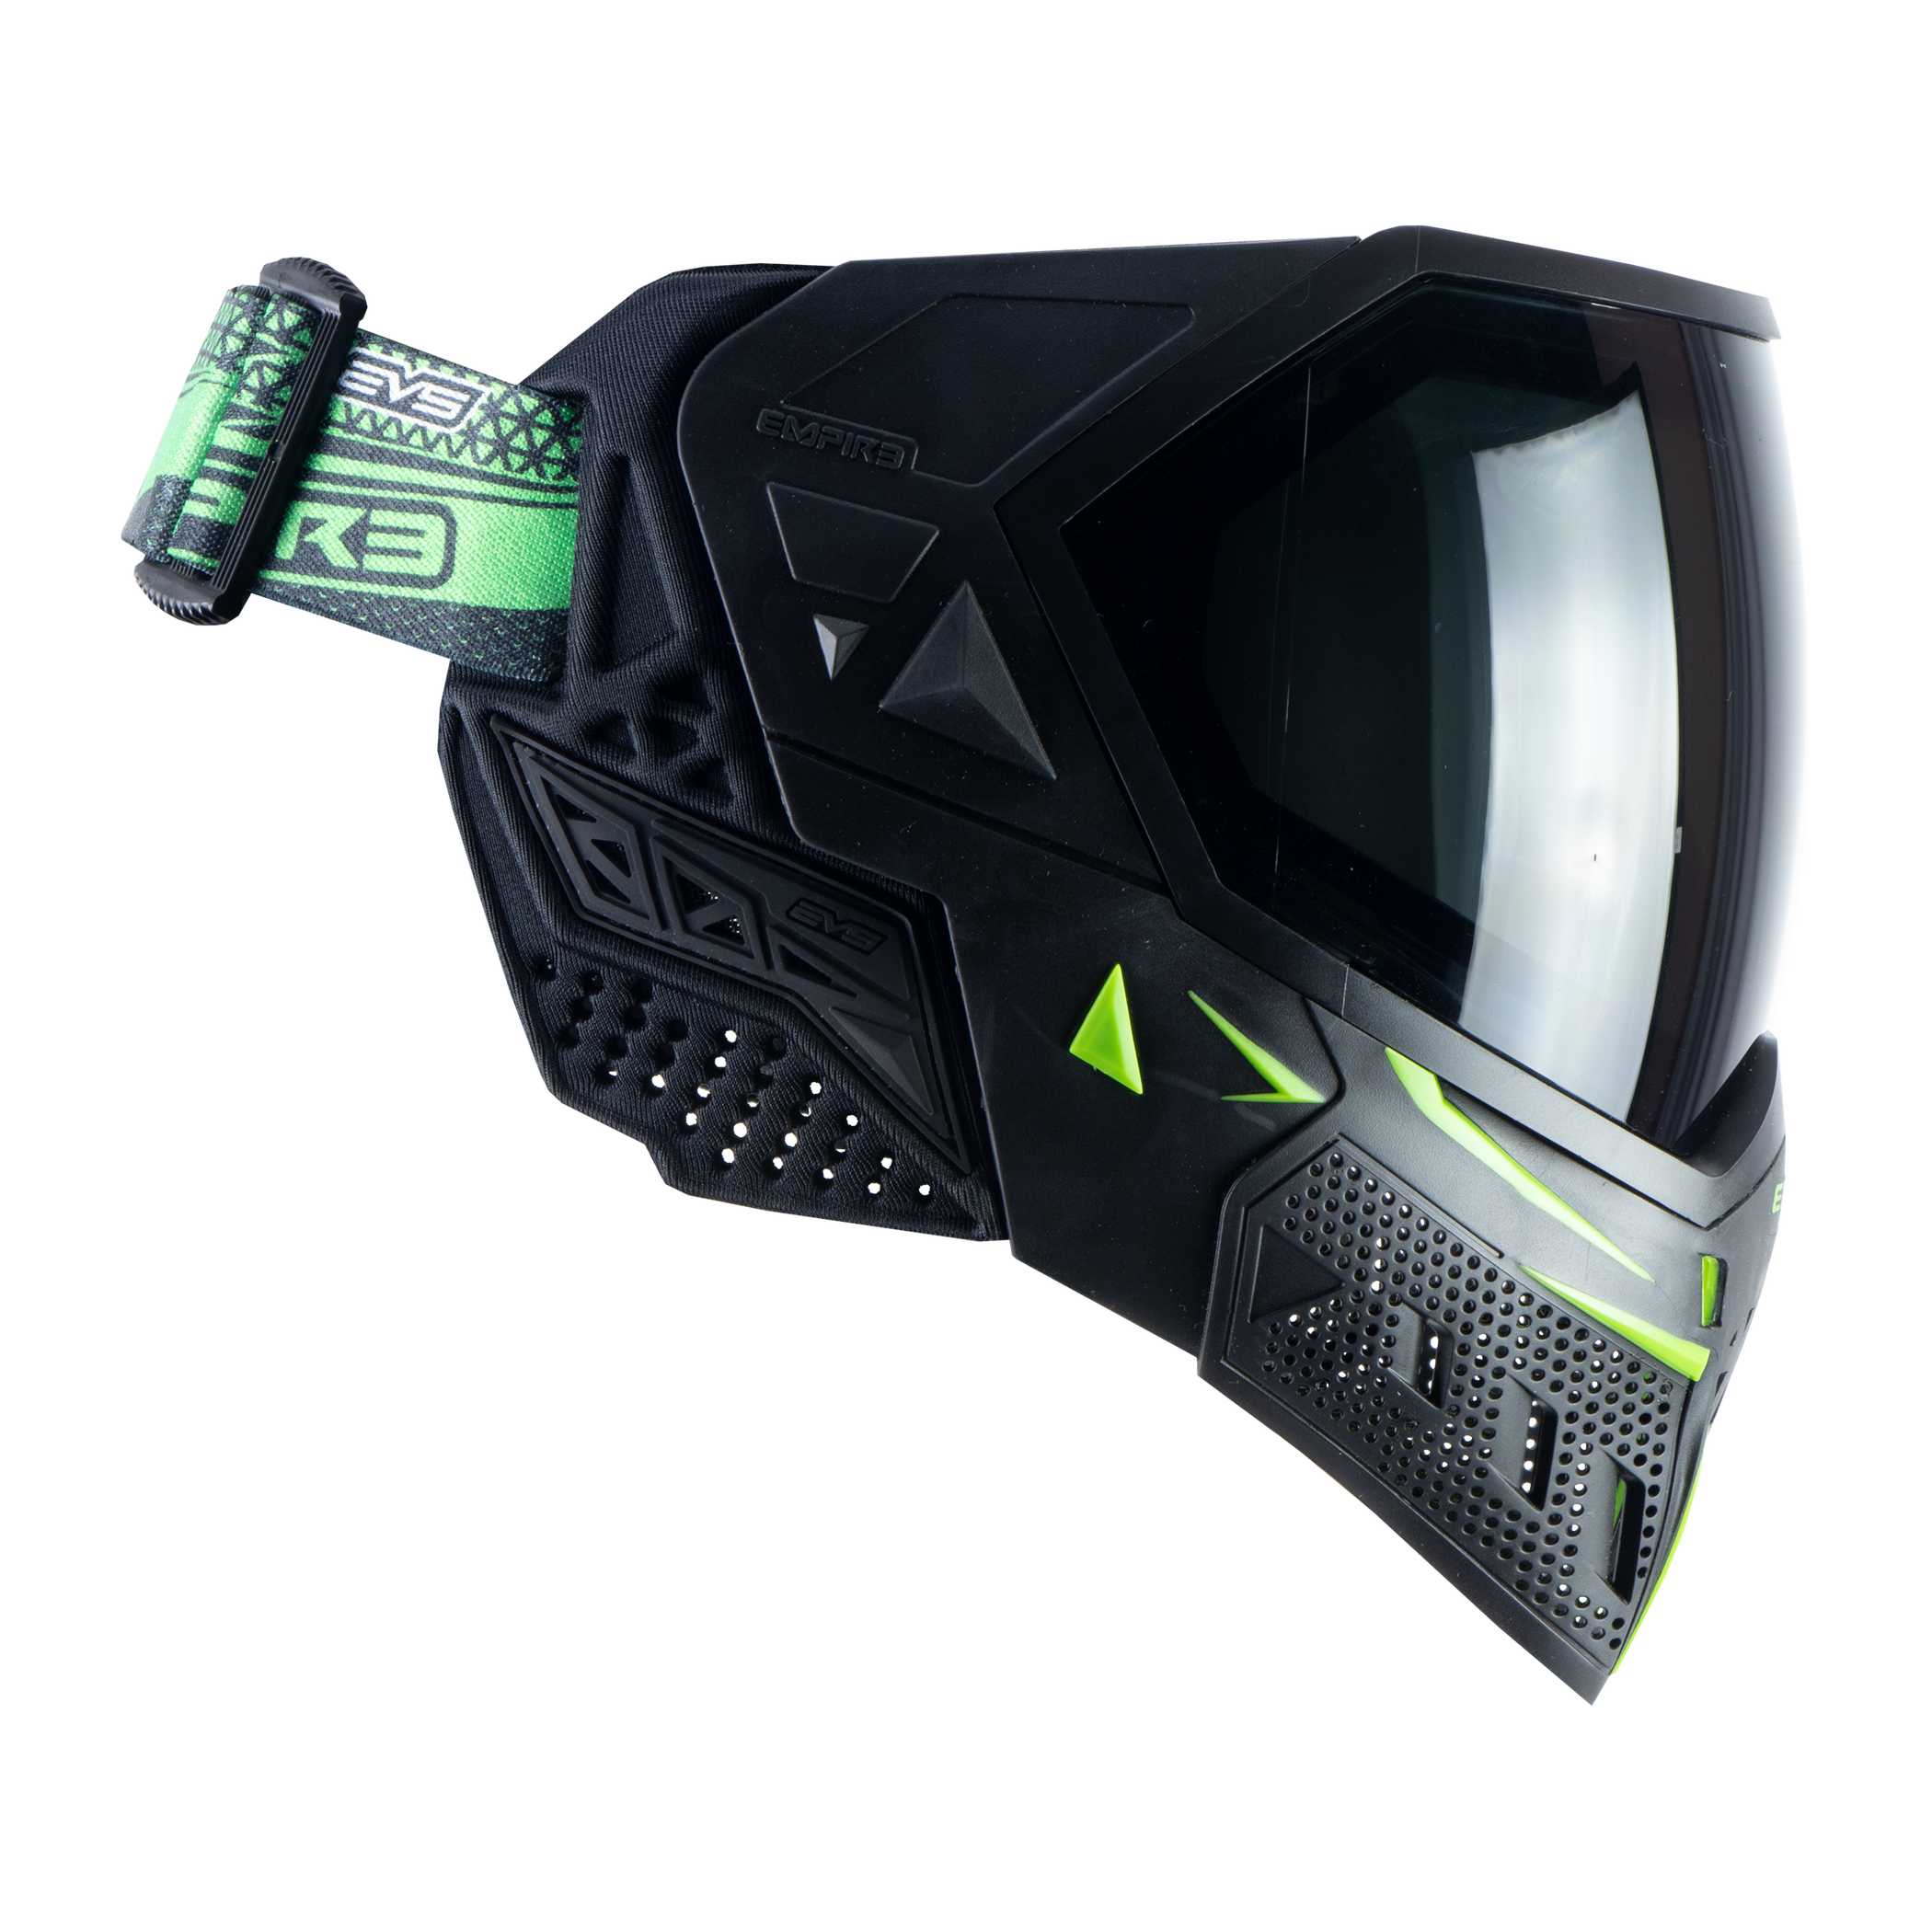 Empire EVS Paintball Mask - Black/Green (Thermal Smoke & Clear Lens)